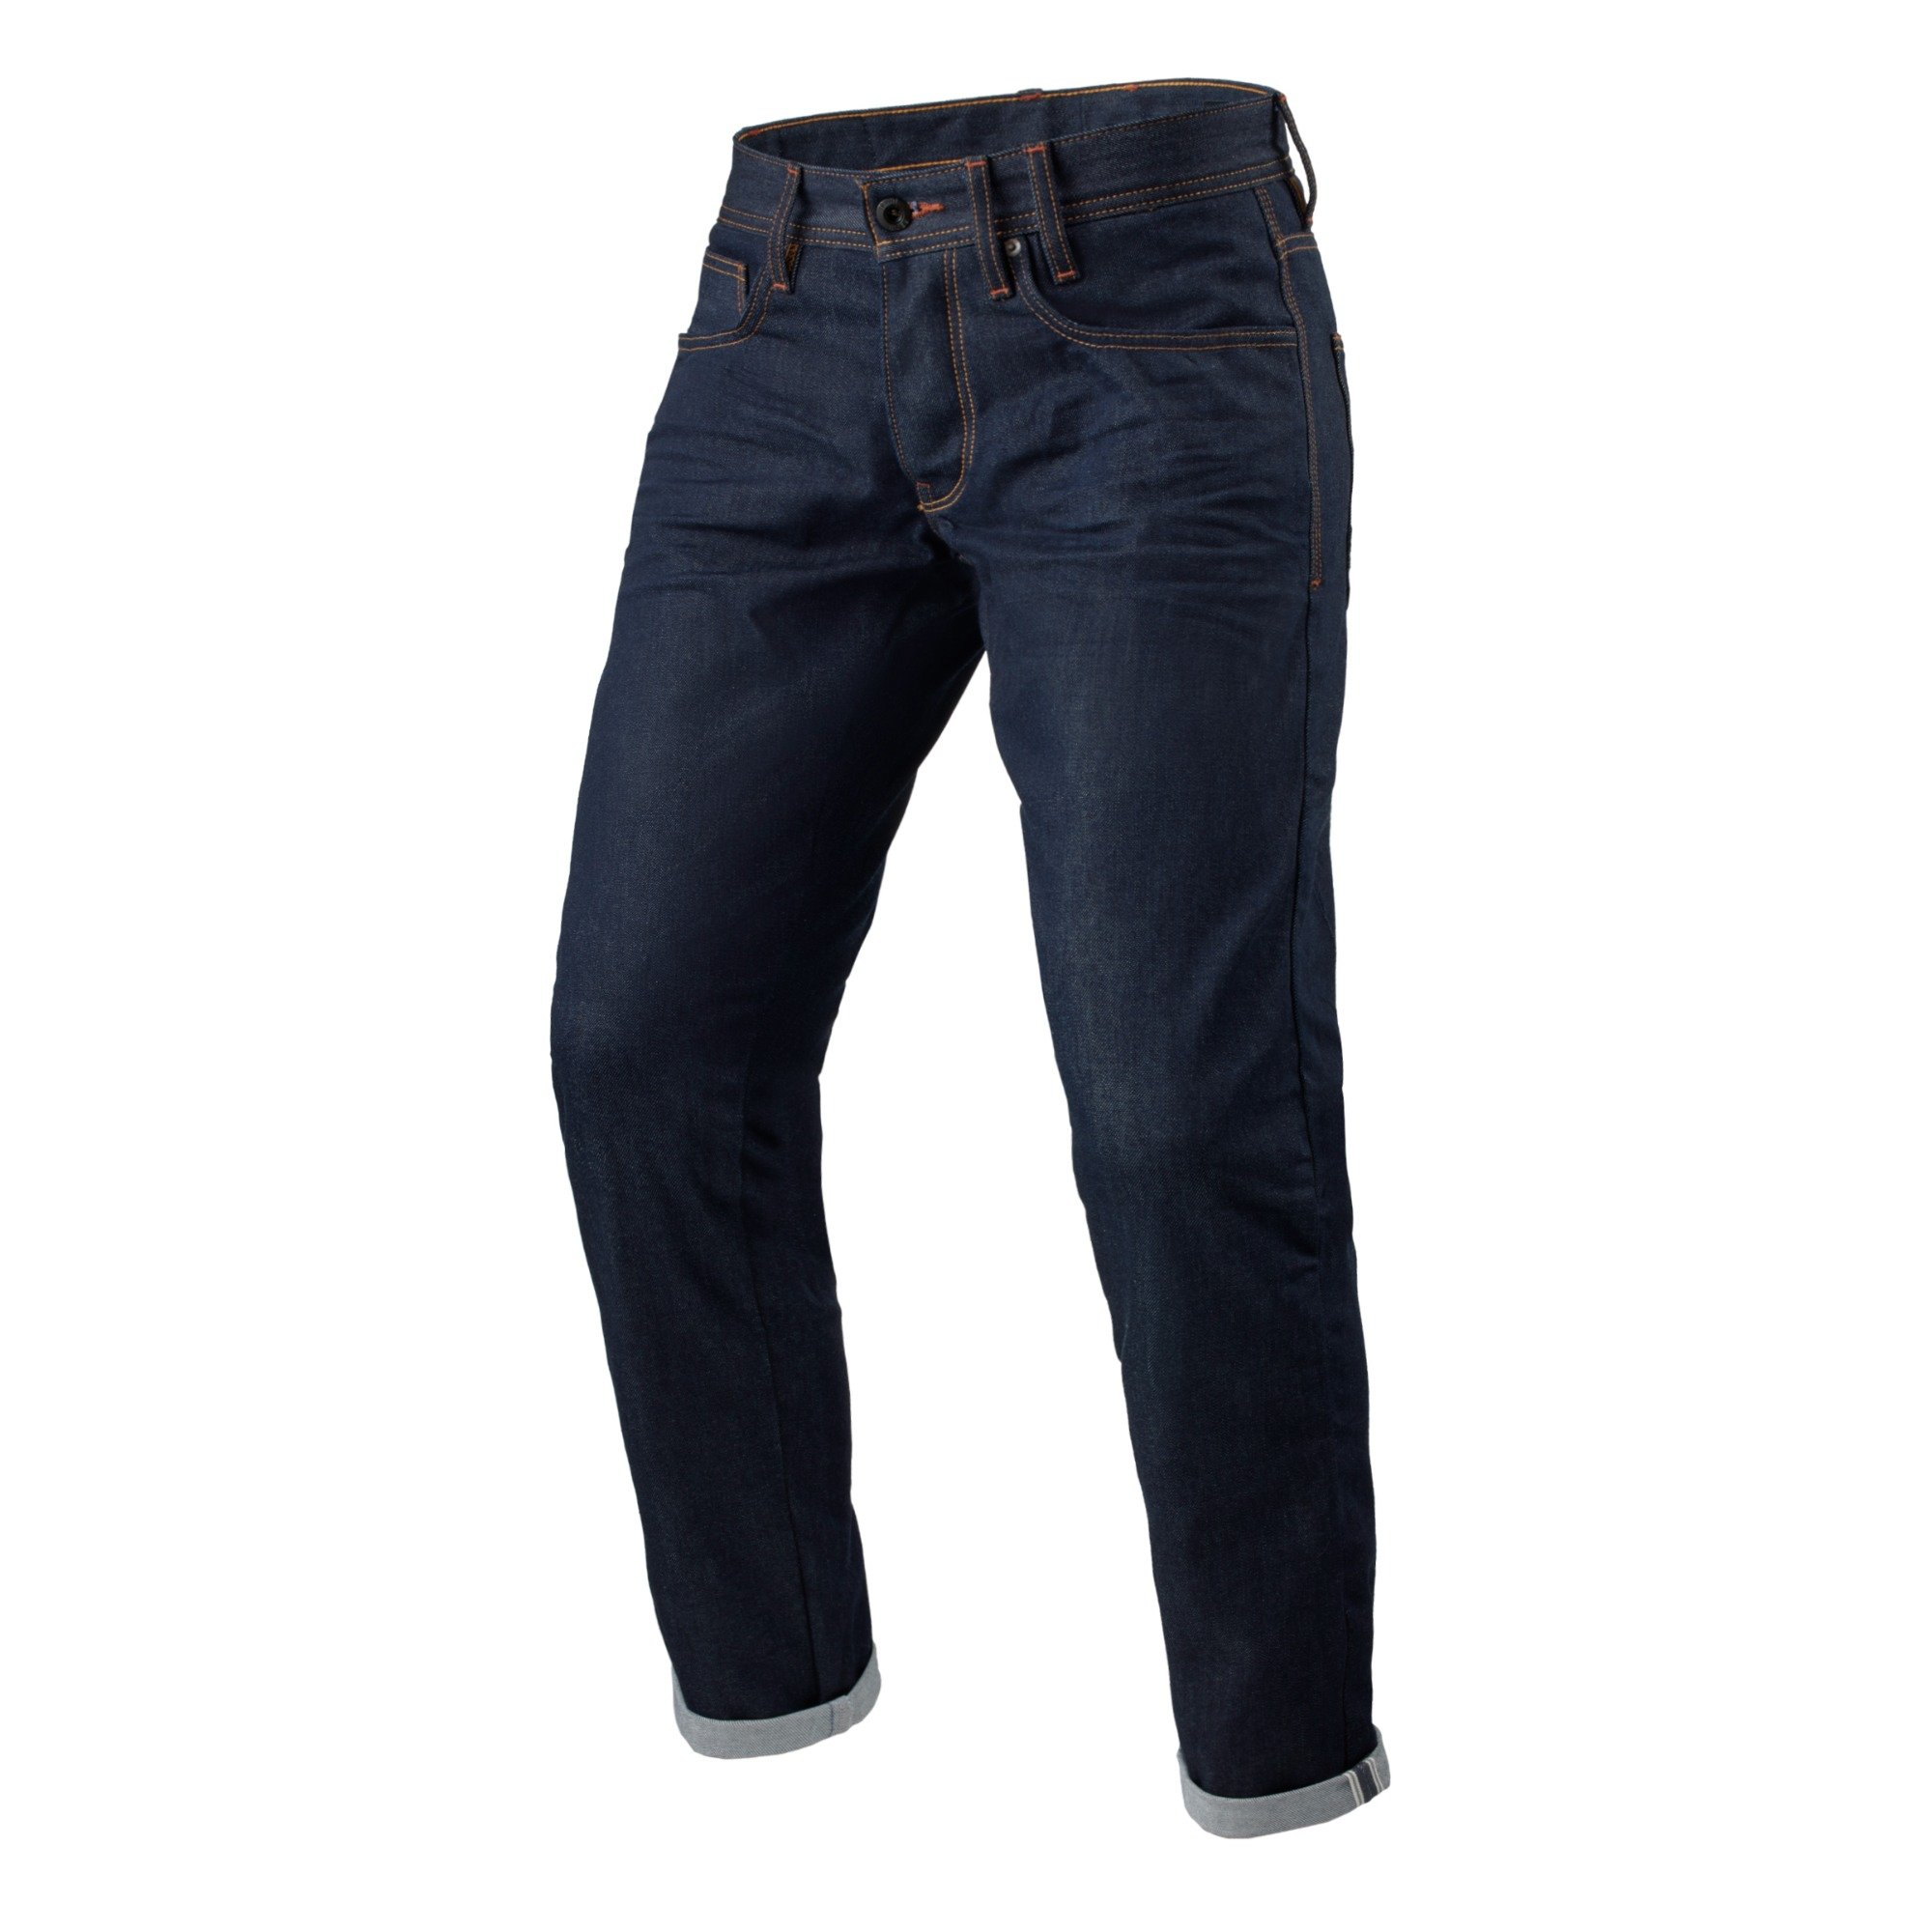 Image of REV'IT! Jeans Lewis Selvedge TF Dark Blue L32 Motorcycle Pants Size L32/W34 ID 8700001358071